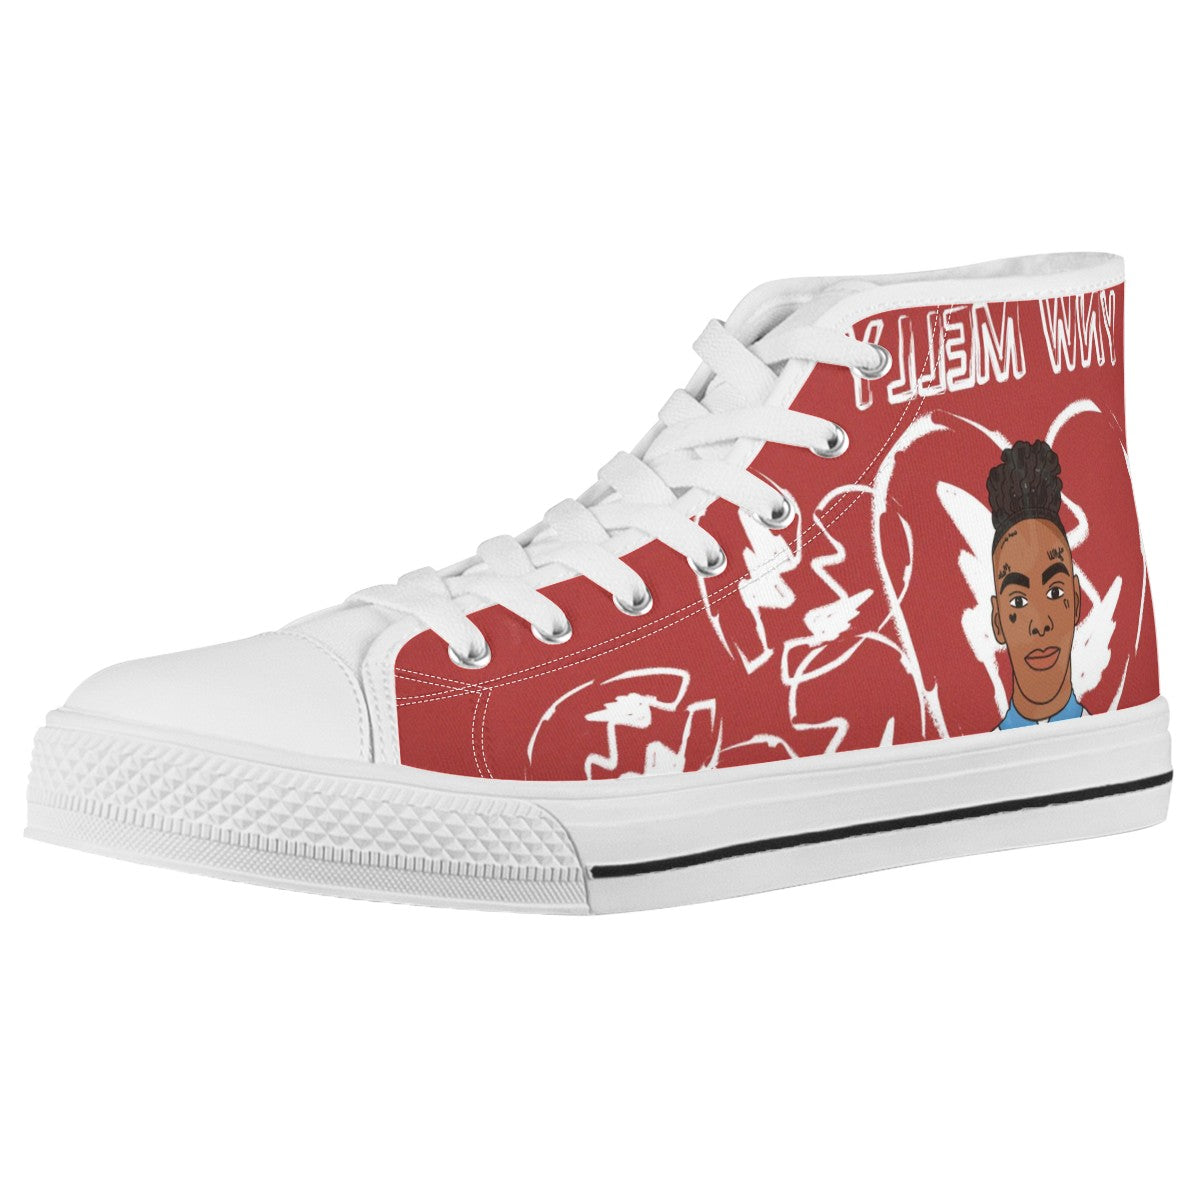 Ynw Melly Custom Converse Chuck Taylor High Top Canvas Shoes